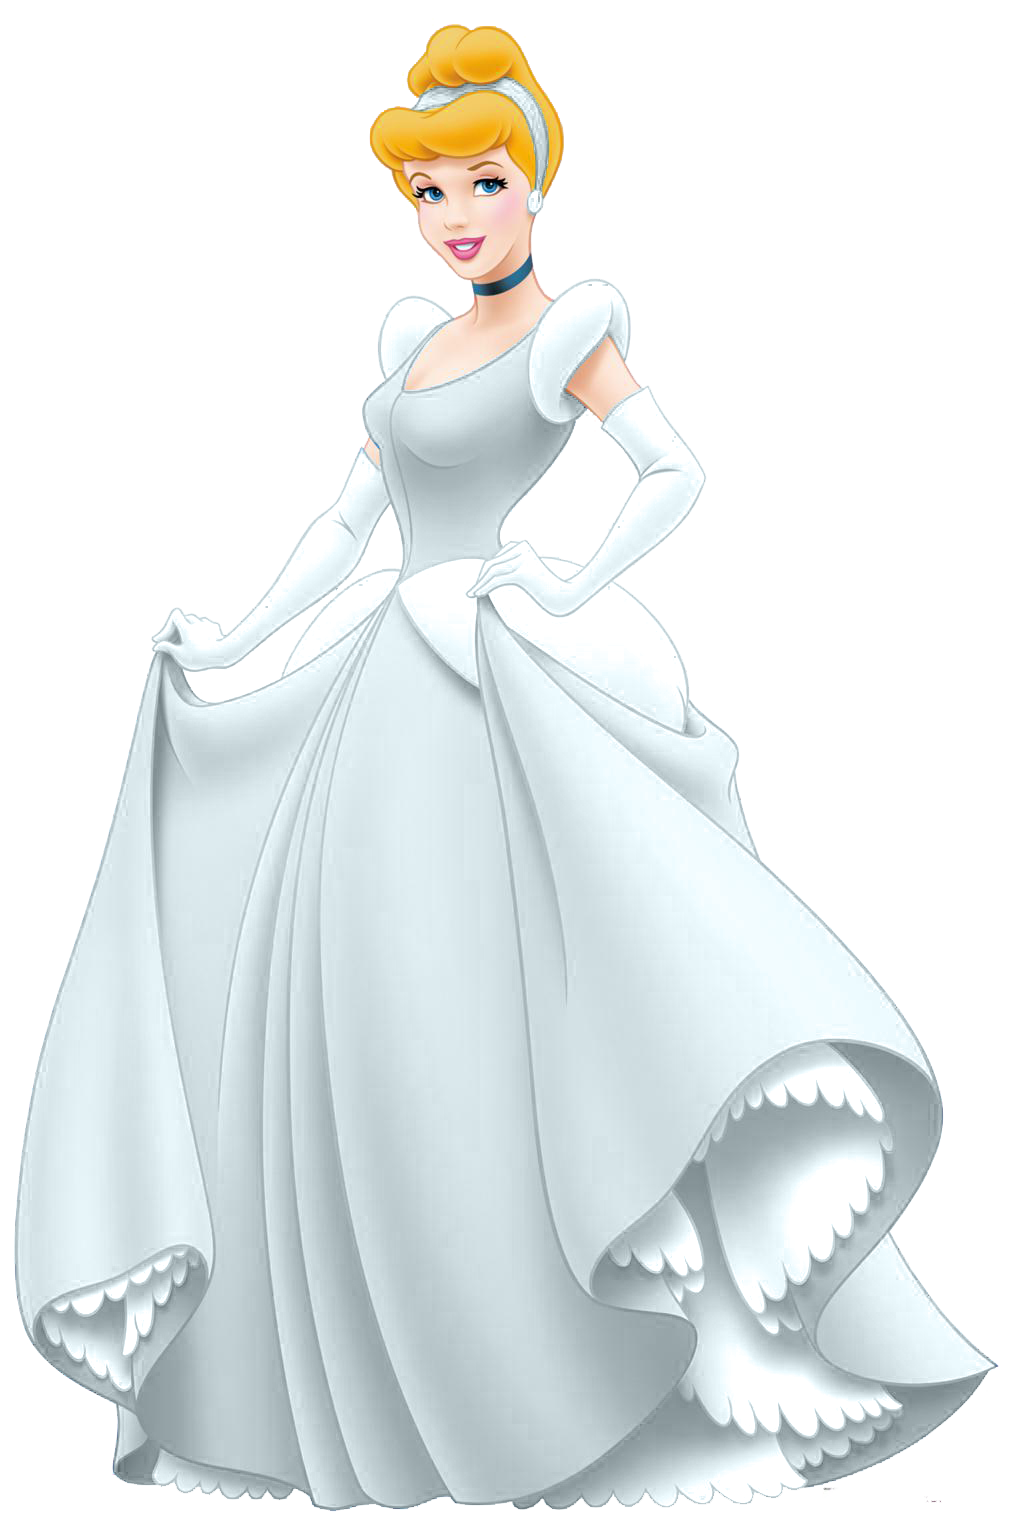 Character smile official disney. Beautiful clipart cinderella